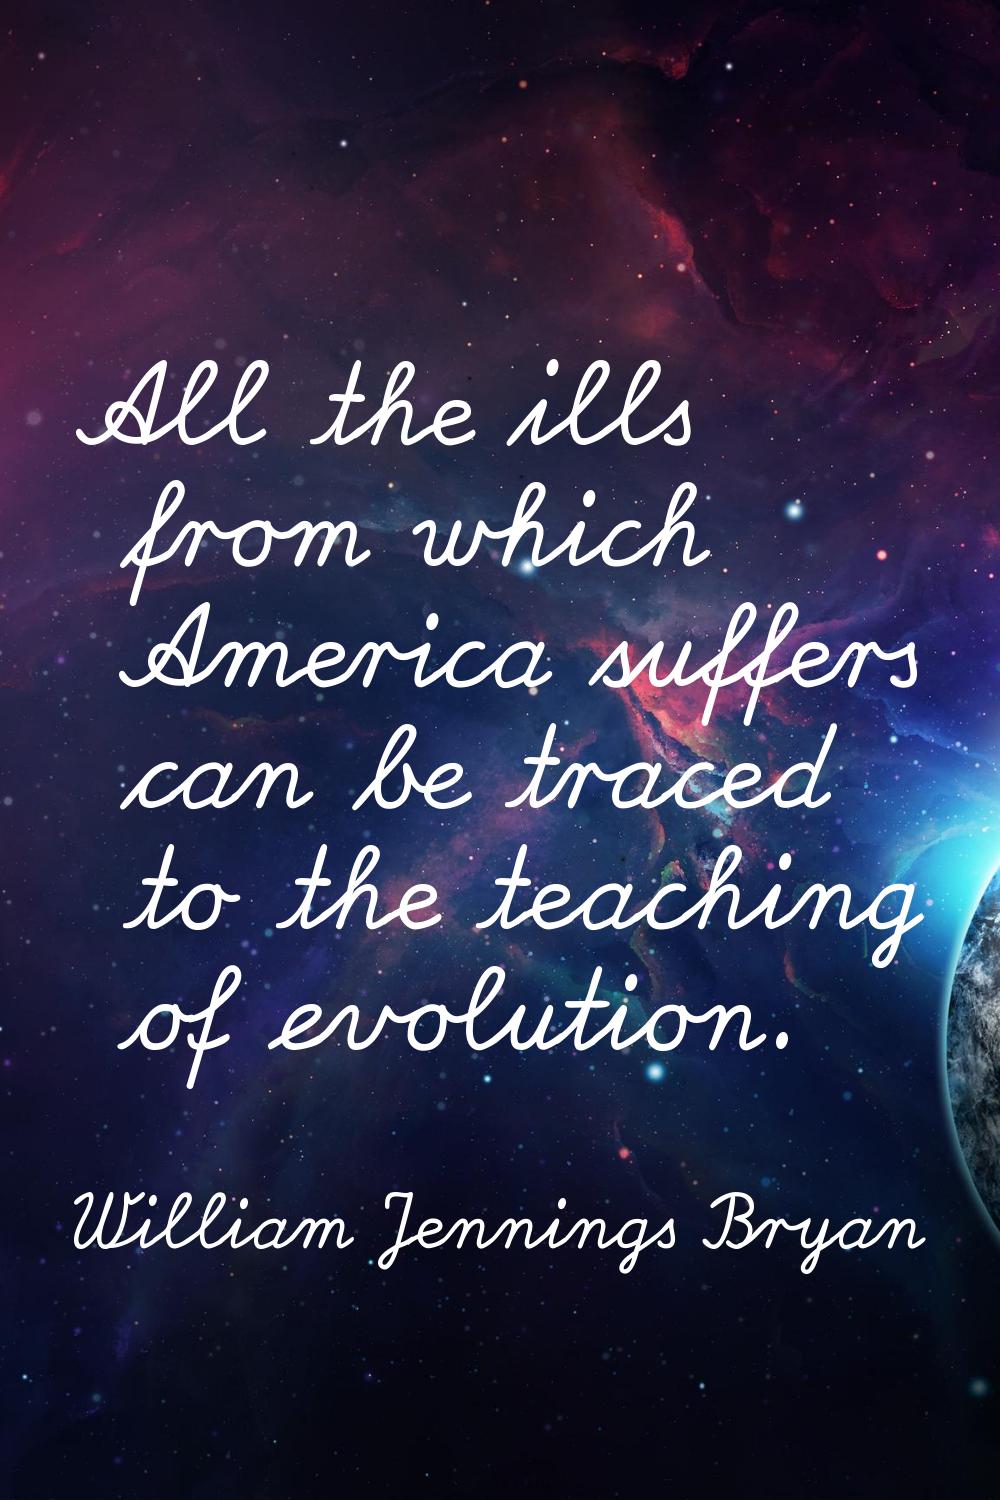 All the ills from which America suffers can be traced to the teaching of evolution.